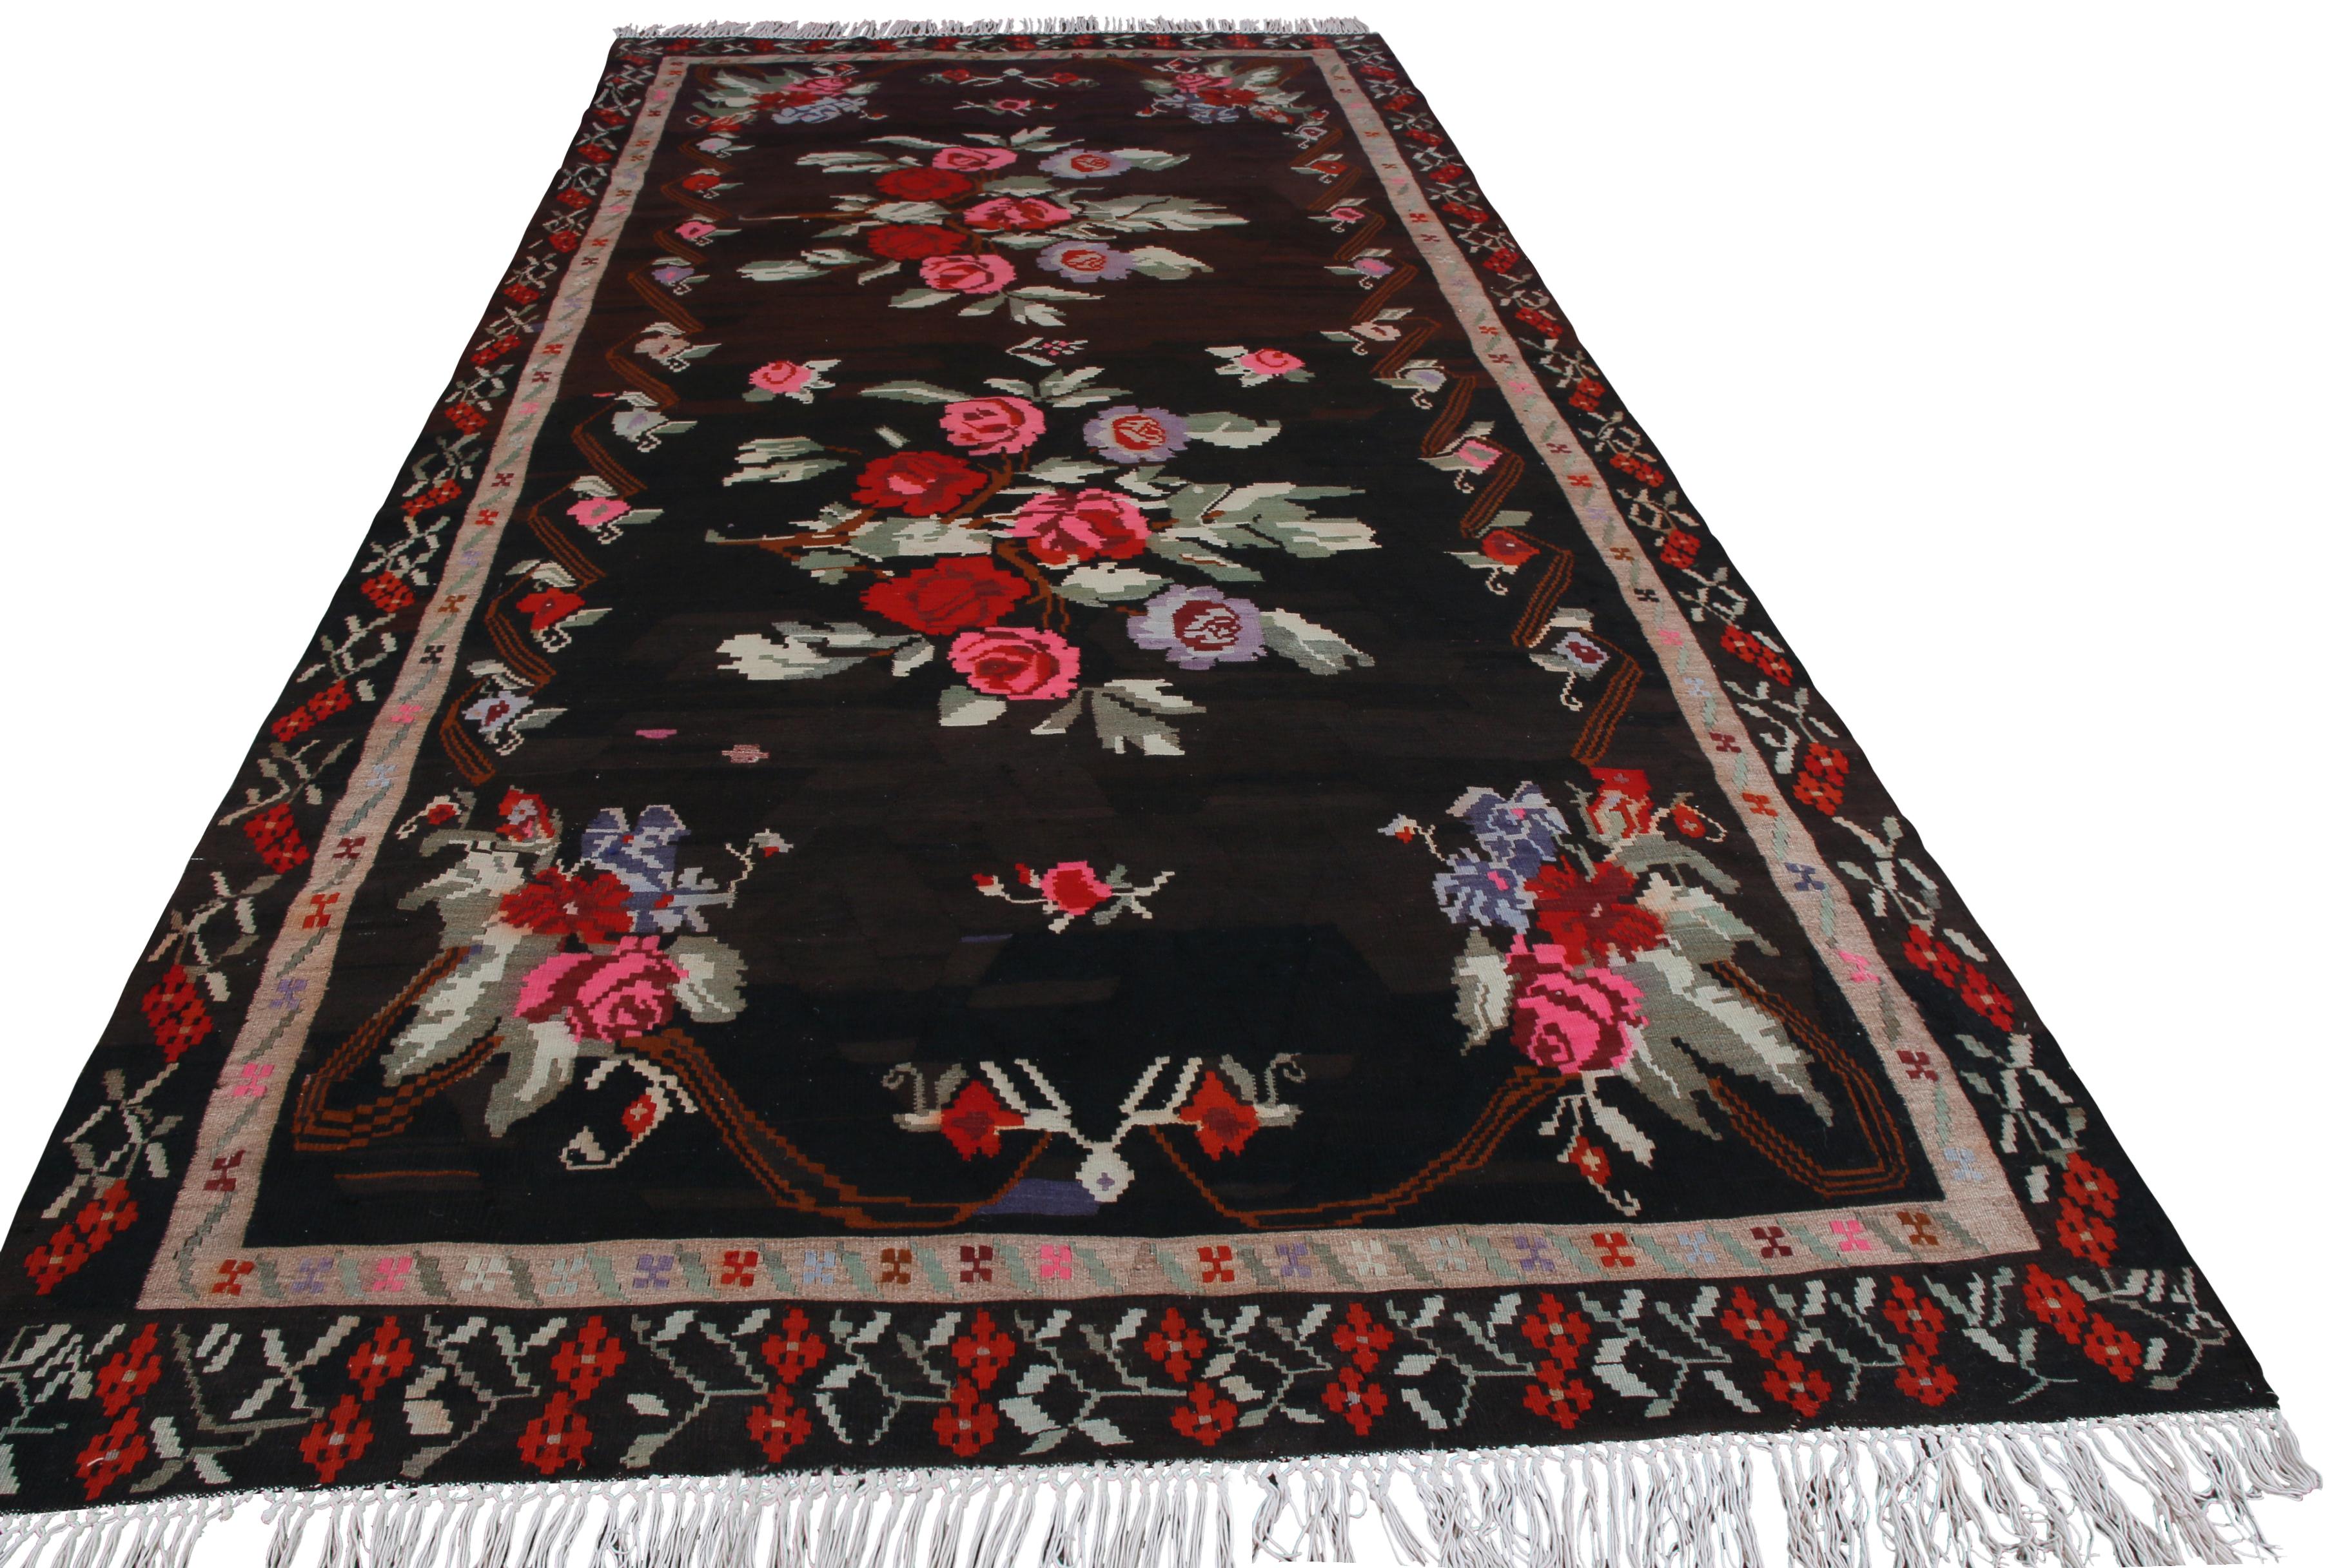 Midcentury, from Turkey, this Bessarabian Turkish flat-weave Kilim rug features floral details for which this style is known. With European stylistic origins in Romania, the Bessarabian style was incorporated into Kilim rugs in Turkey, with this